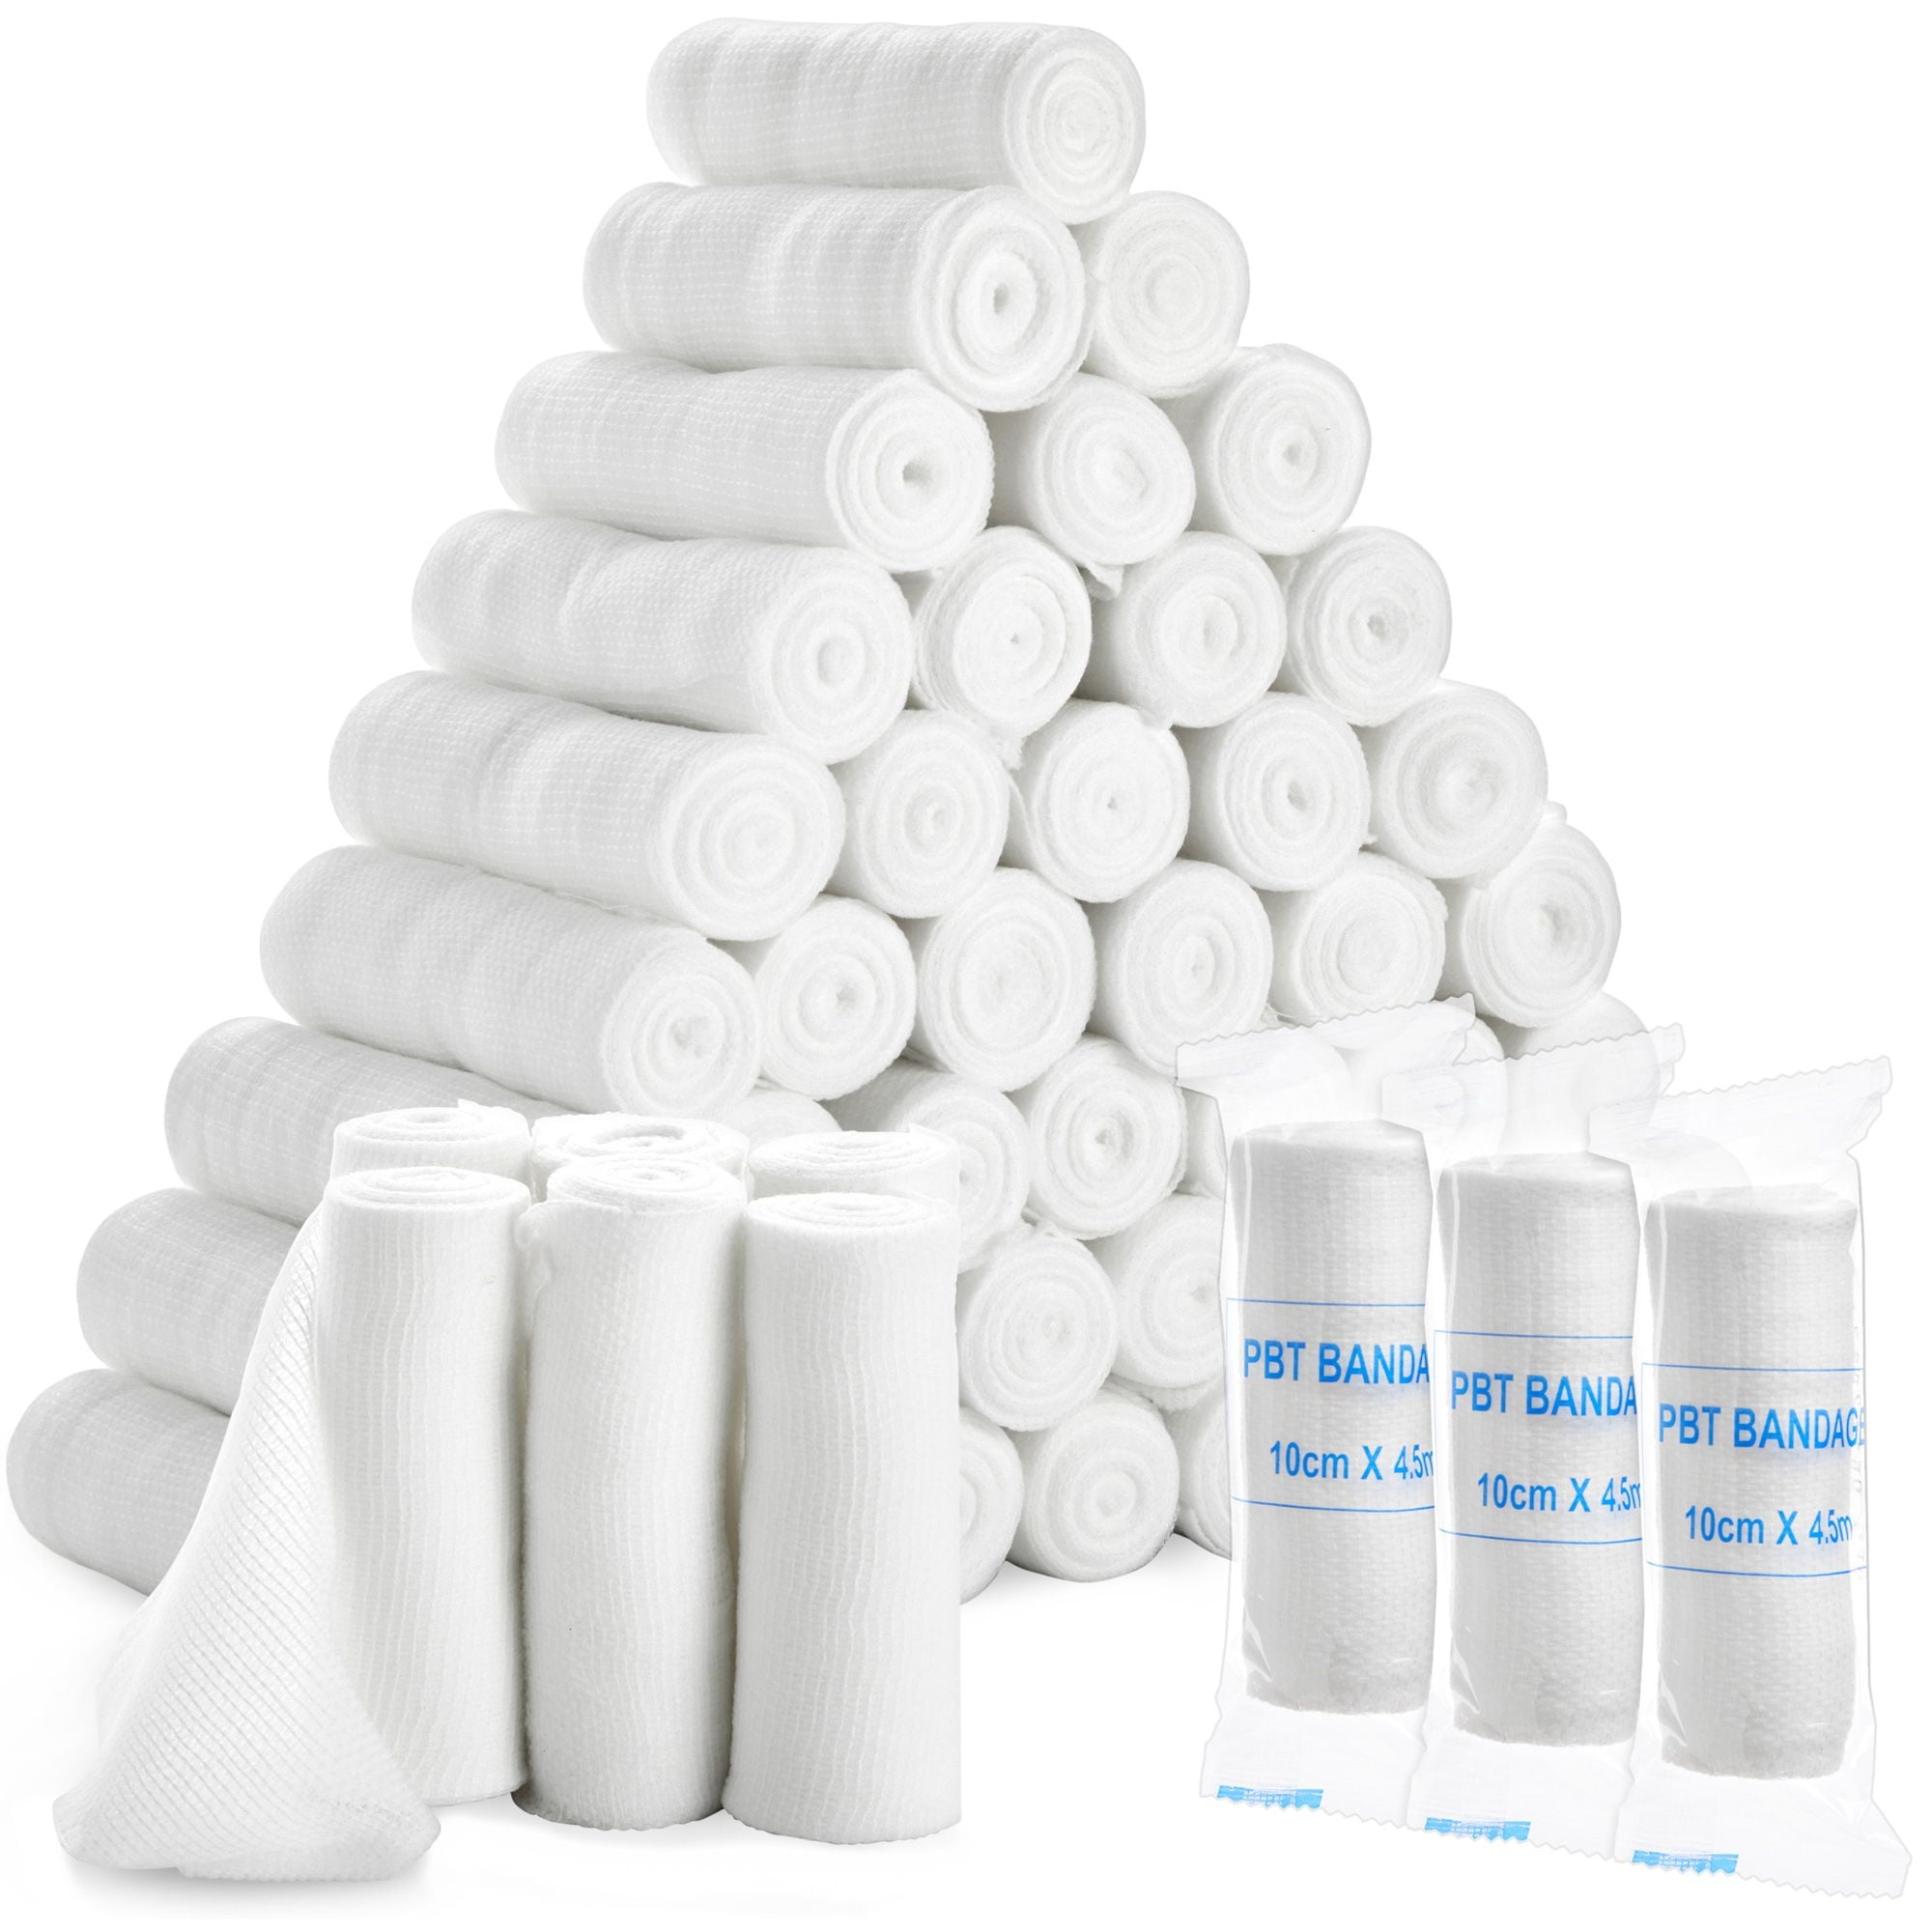 Navaris Plaster Cloth Rolls (S, Pack of 10) - Gauze Bandages for Body  Casts, Craft Projects, Belly Molds - Easy to Use Wrap Strips - 2 W x 118 L